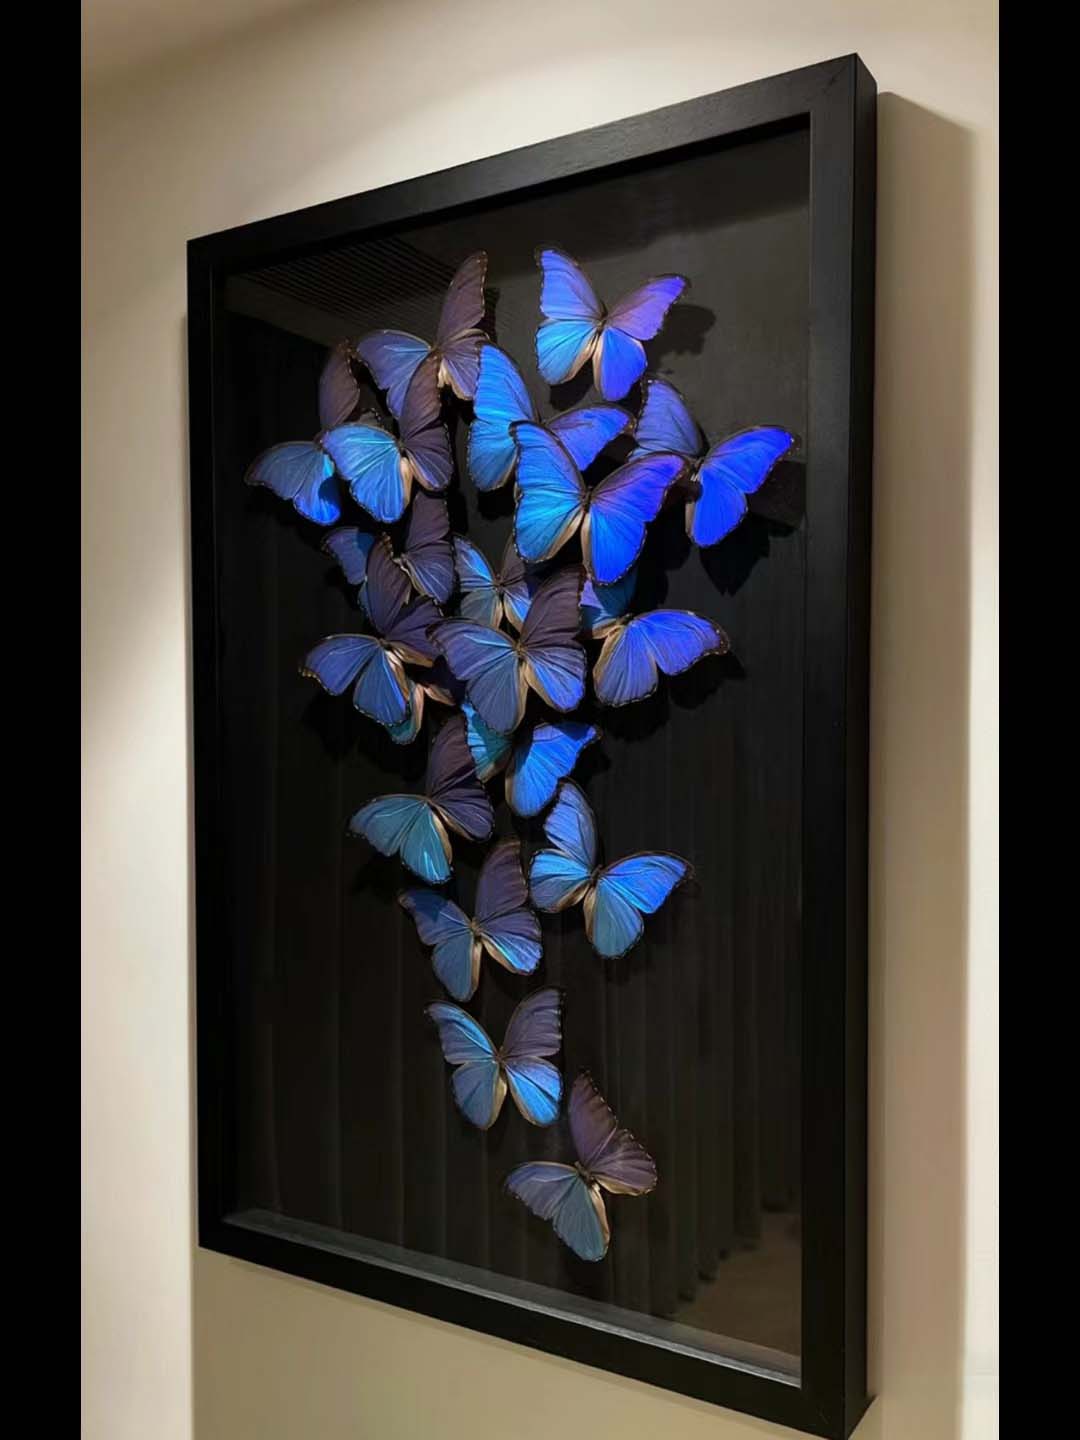 What is it called when you frame butterflies?